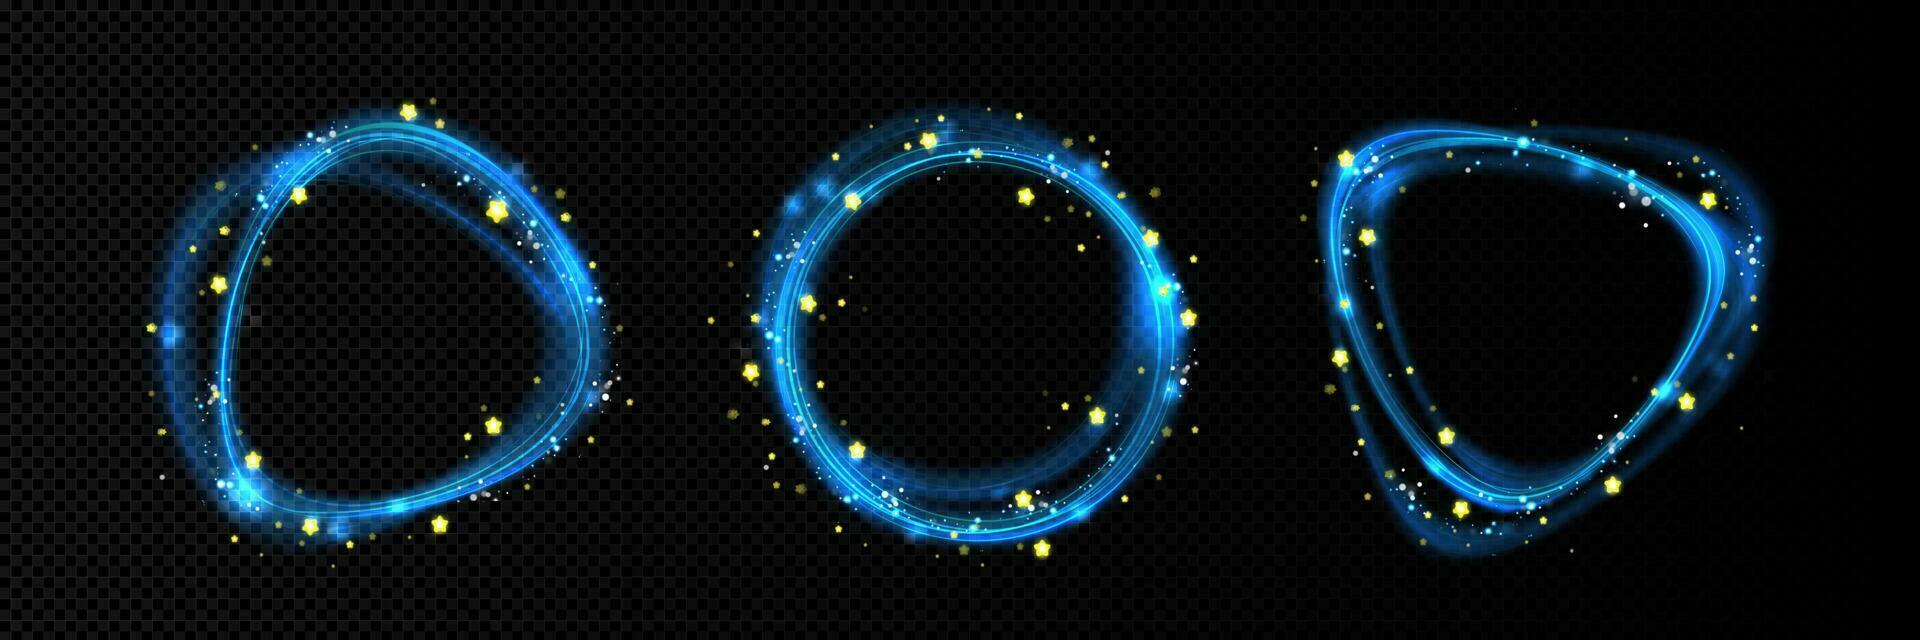 Magic light effect, blue neon lines and gold stars vector